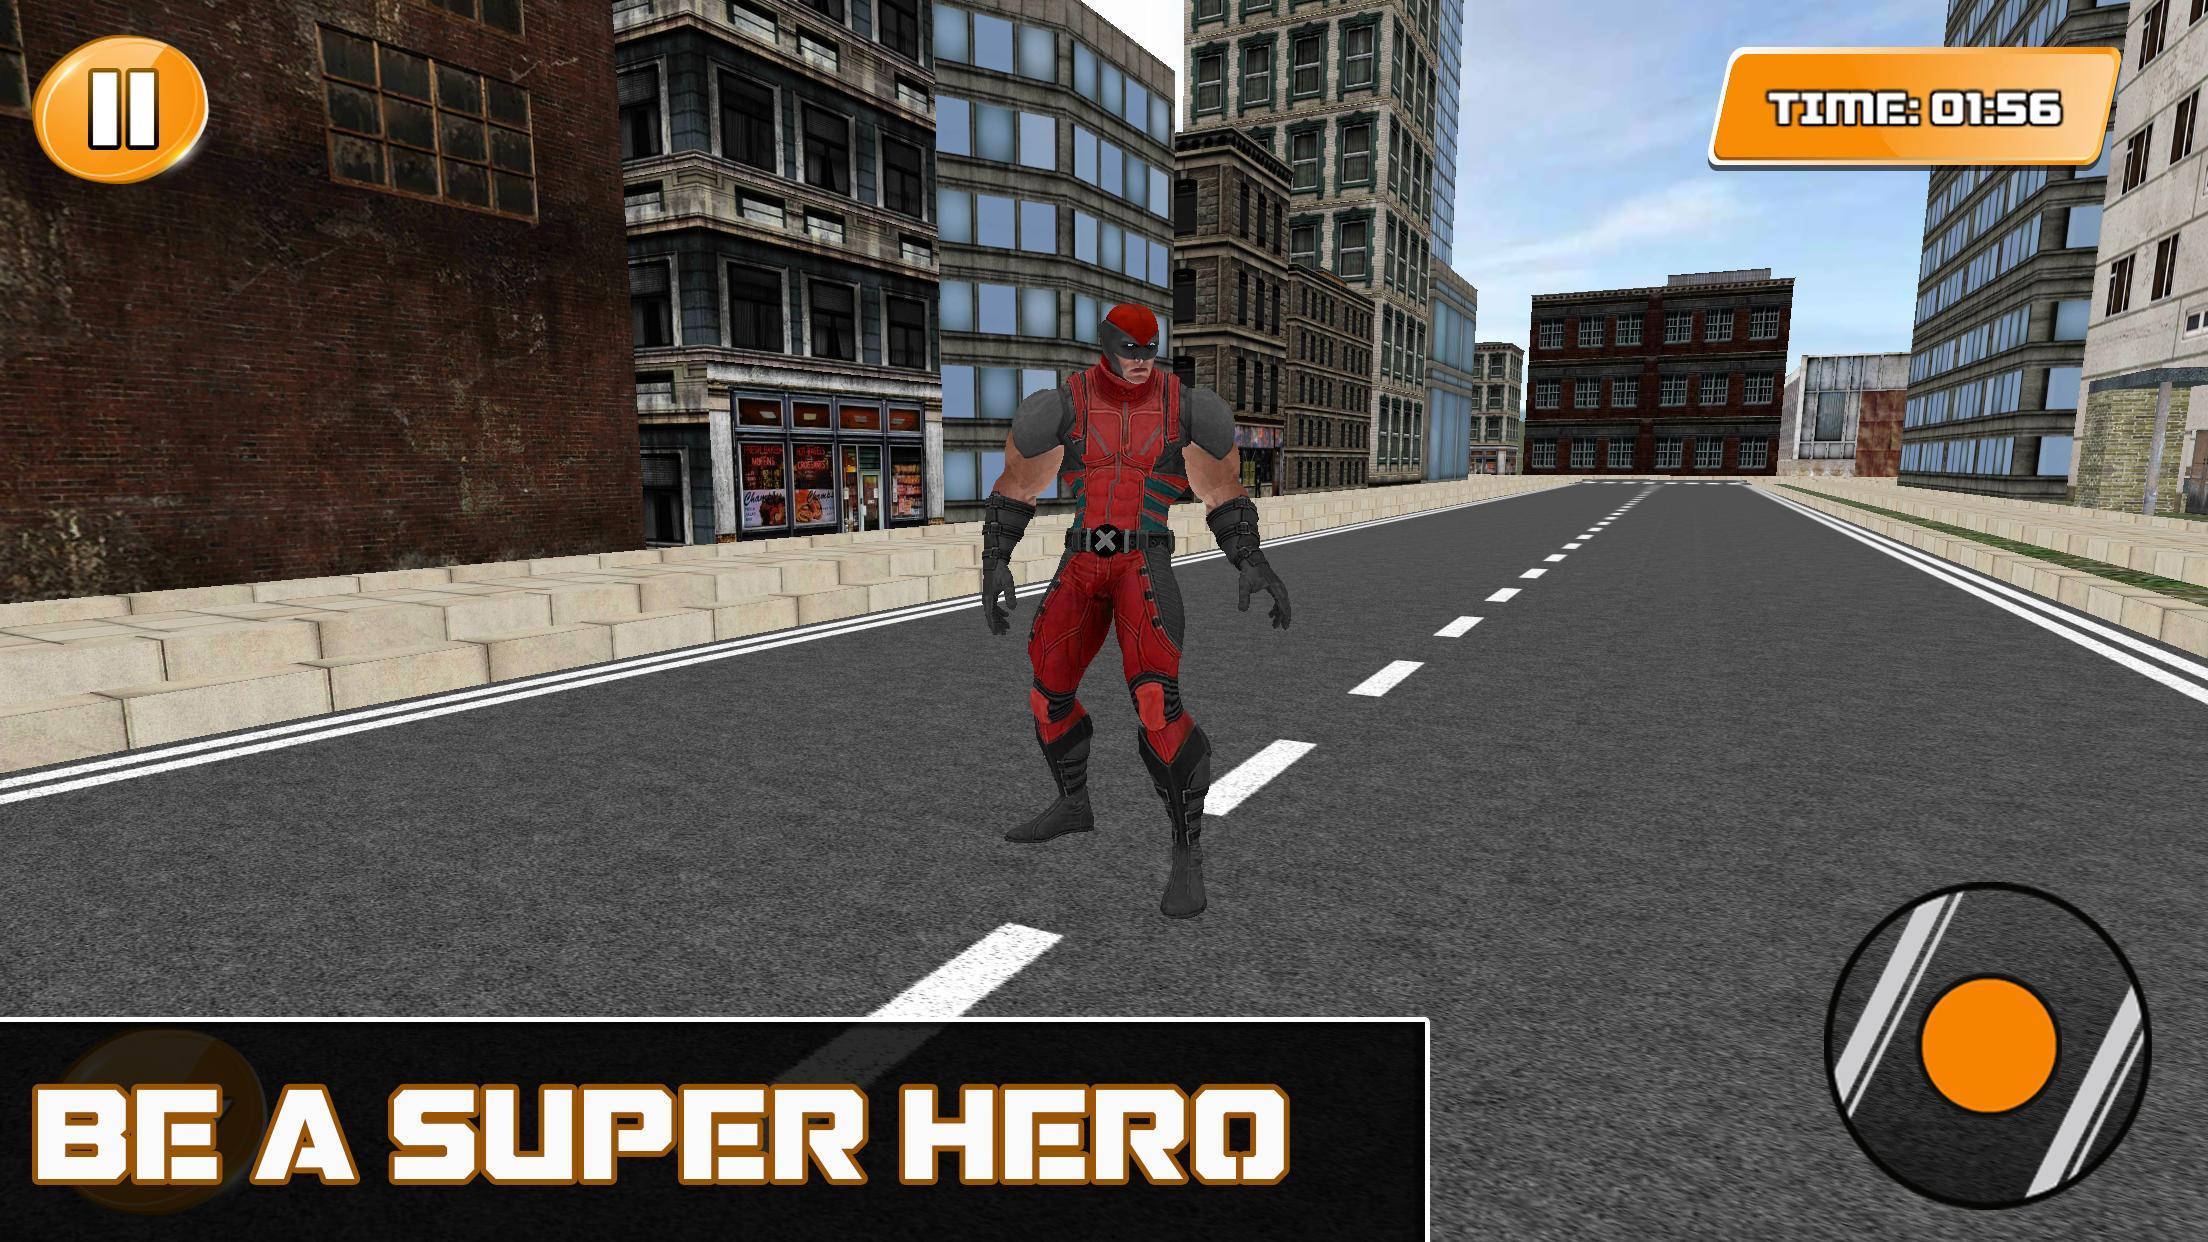 Flying Super Hero Animal Rescue Simulator 3d 2018 For Android